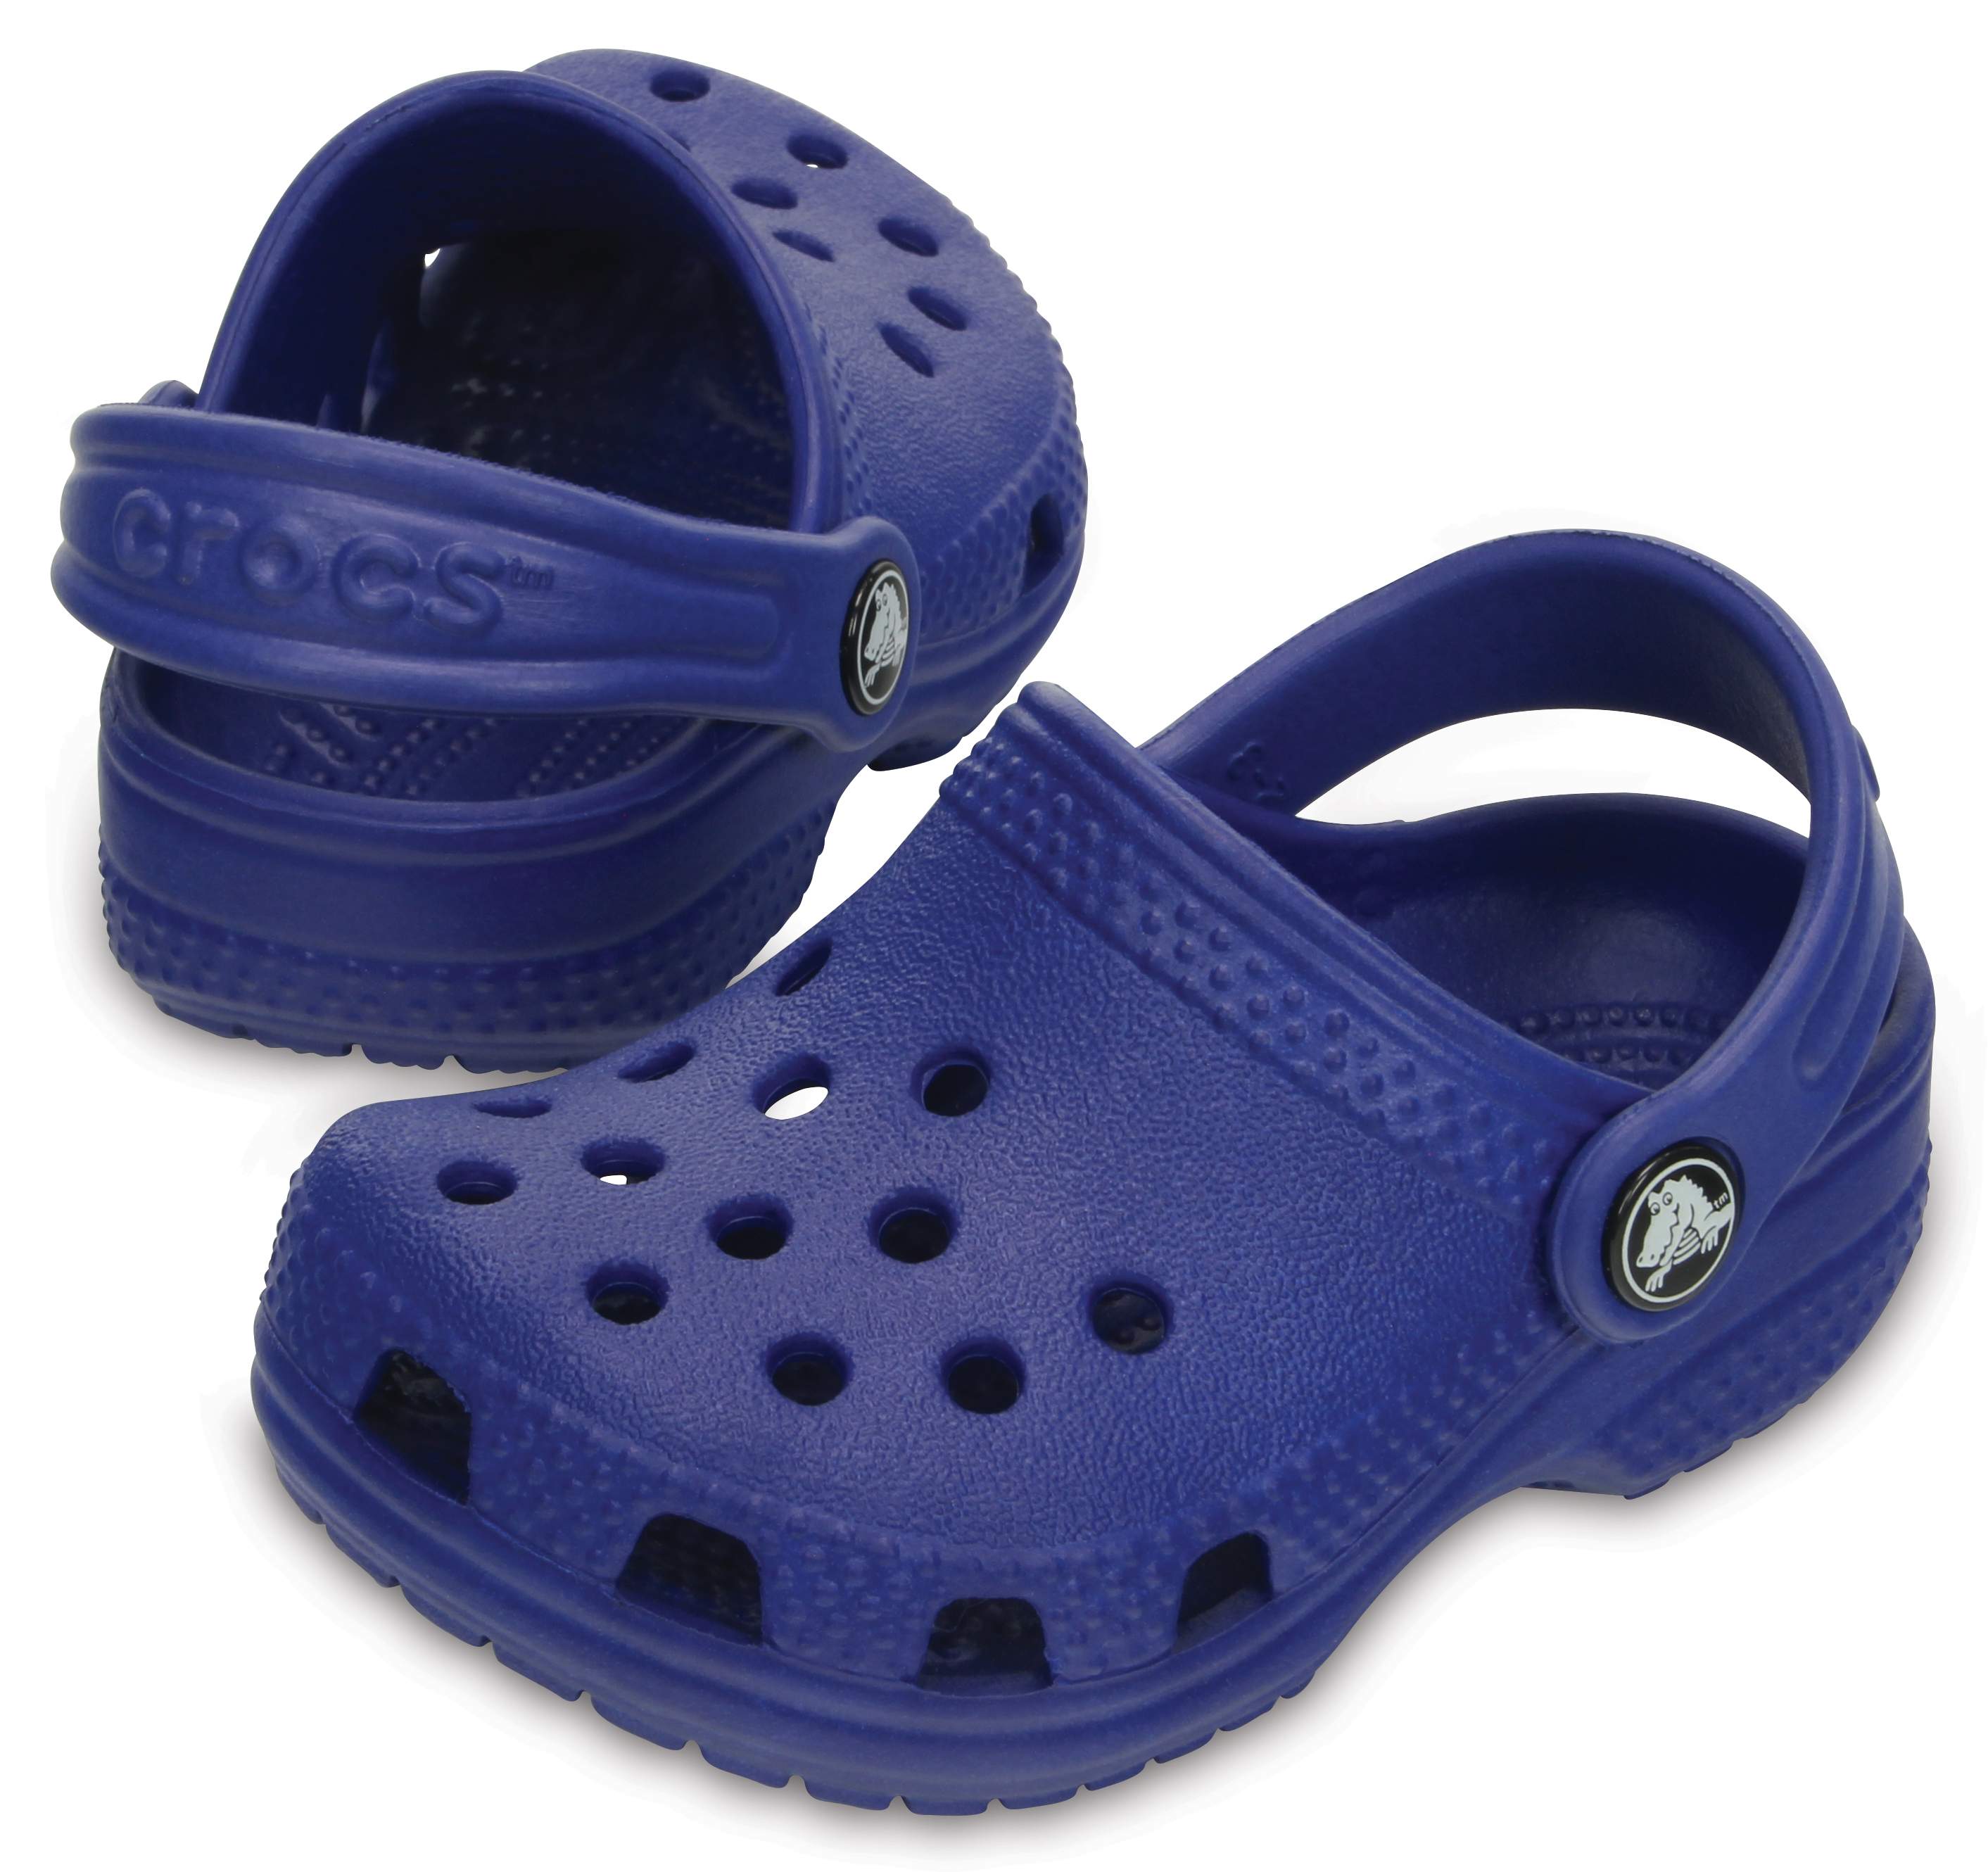 crocs size for 10 year old